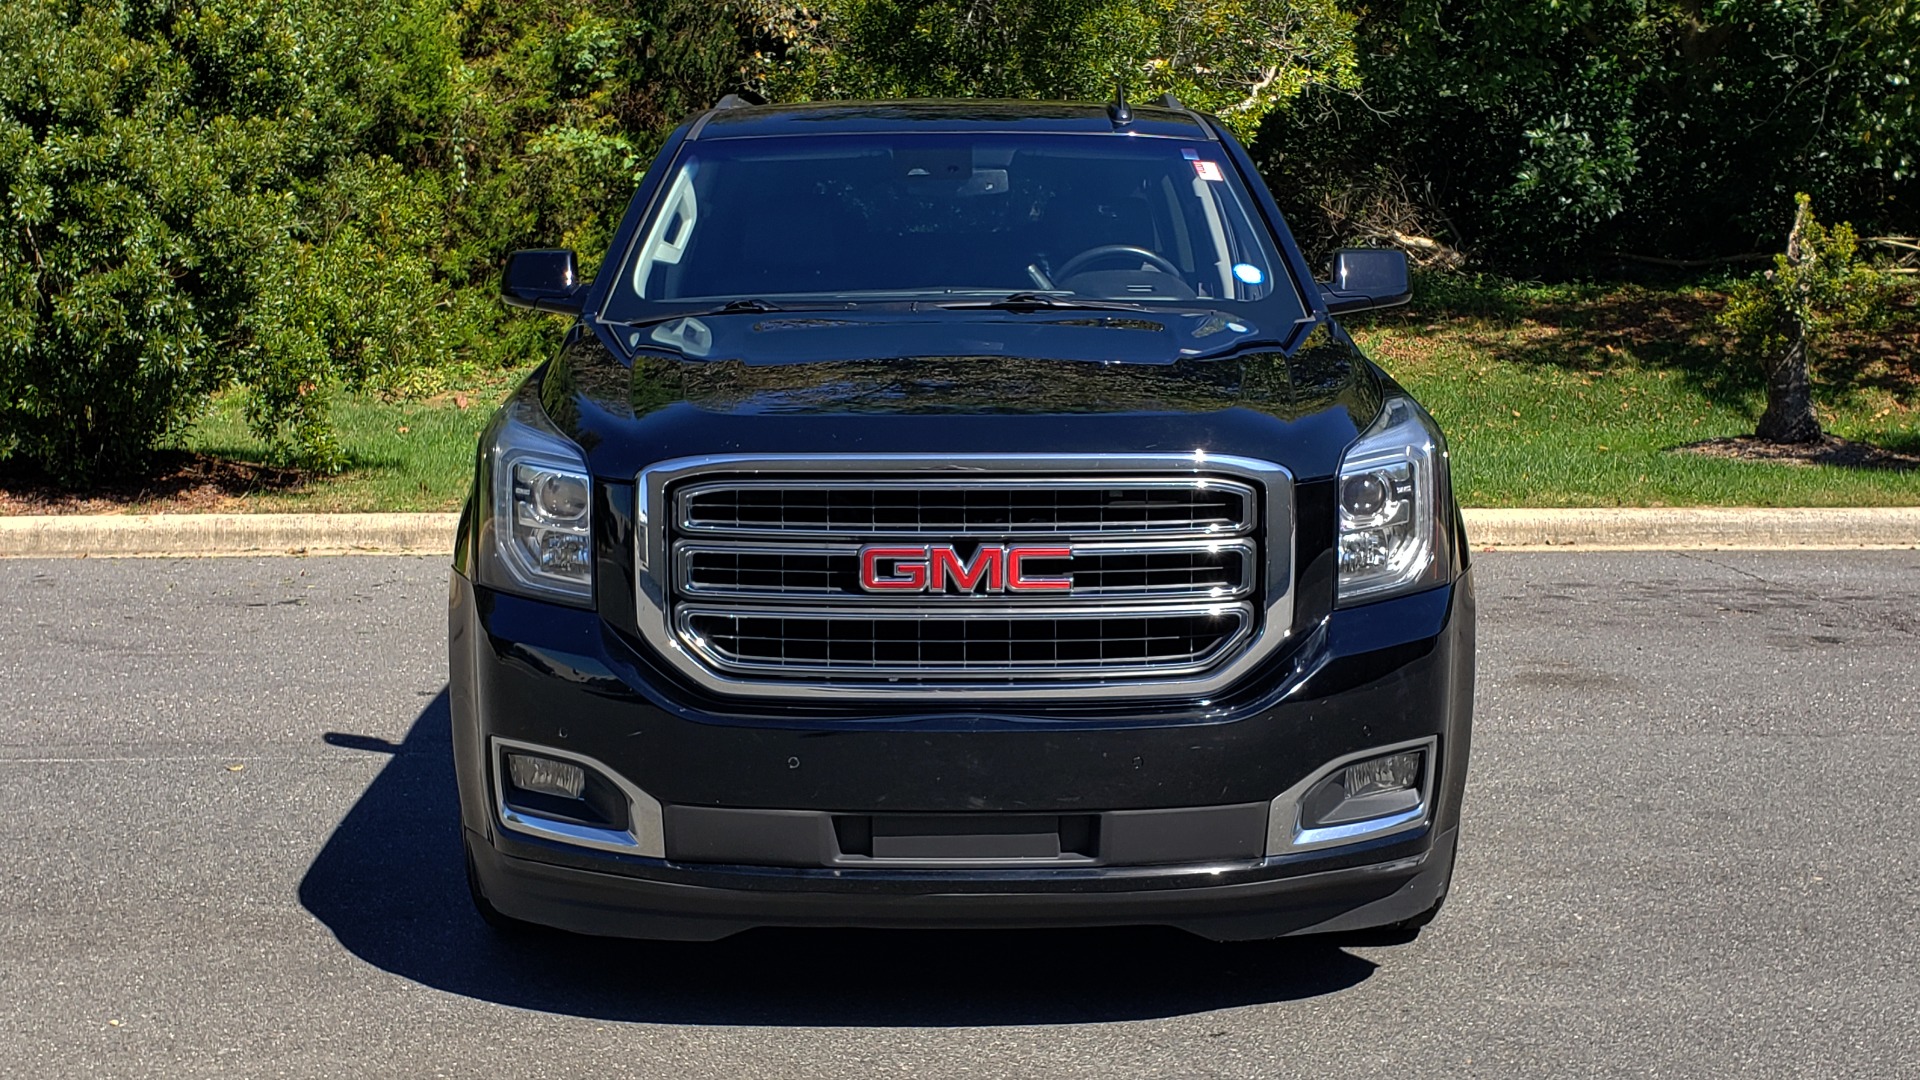 Used 2016 GMC YUKON XL SLT / NAV / BOSE / 3-ROWS - SEATS 8 / REARVIEW for sale Sold at Formula Imports in Charlotte NC 28227 24